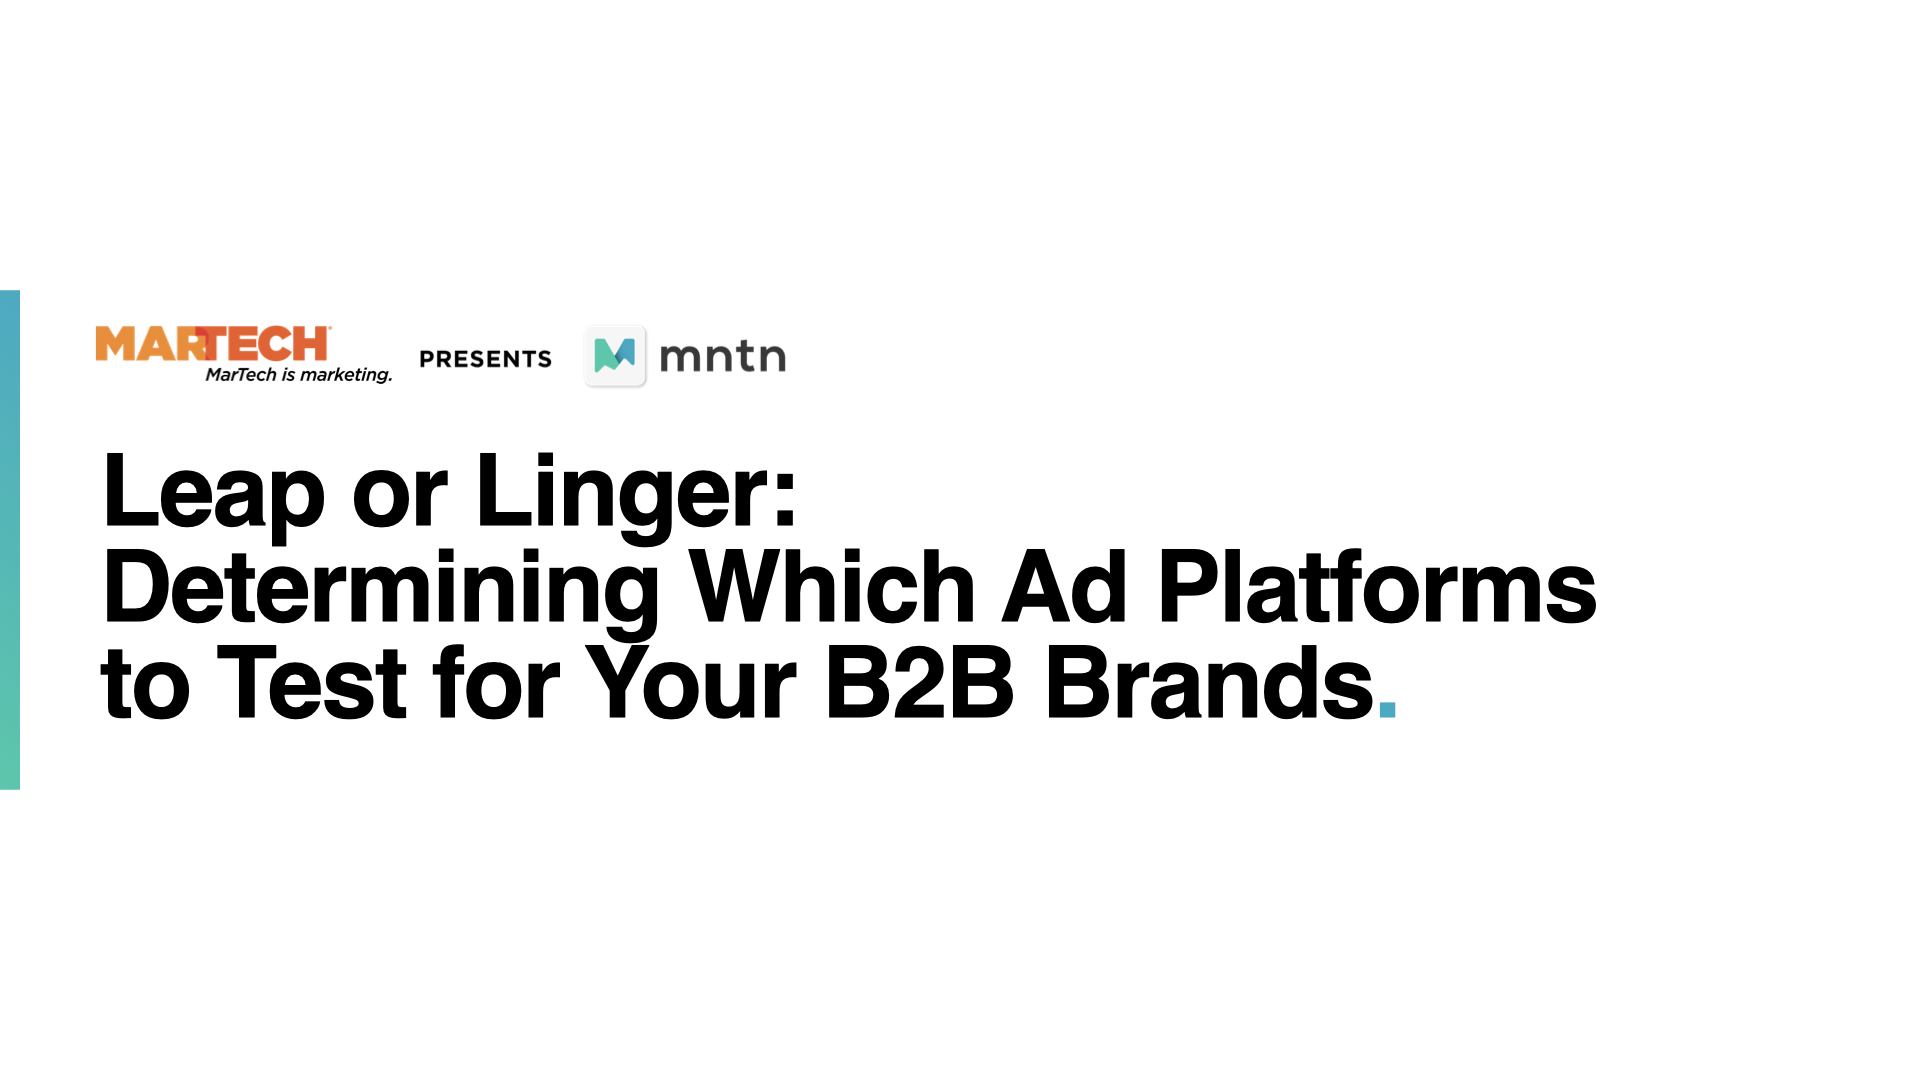 Leap or Linger: Determining Which Ad Platforms to Test for Your B2B Brand